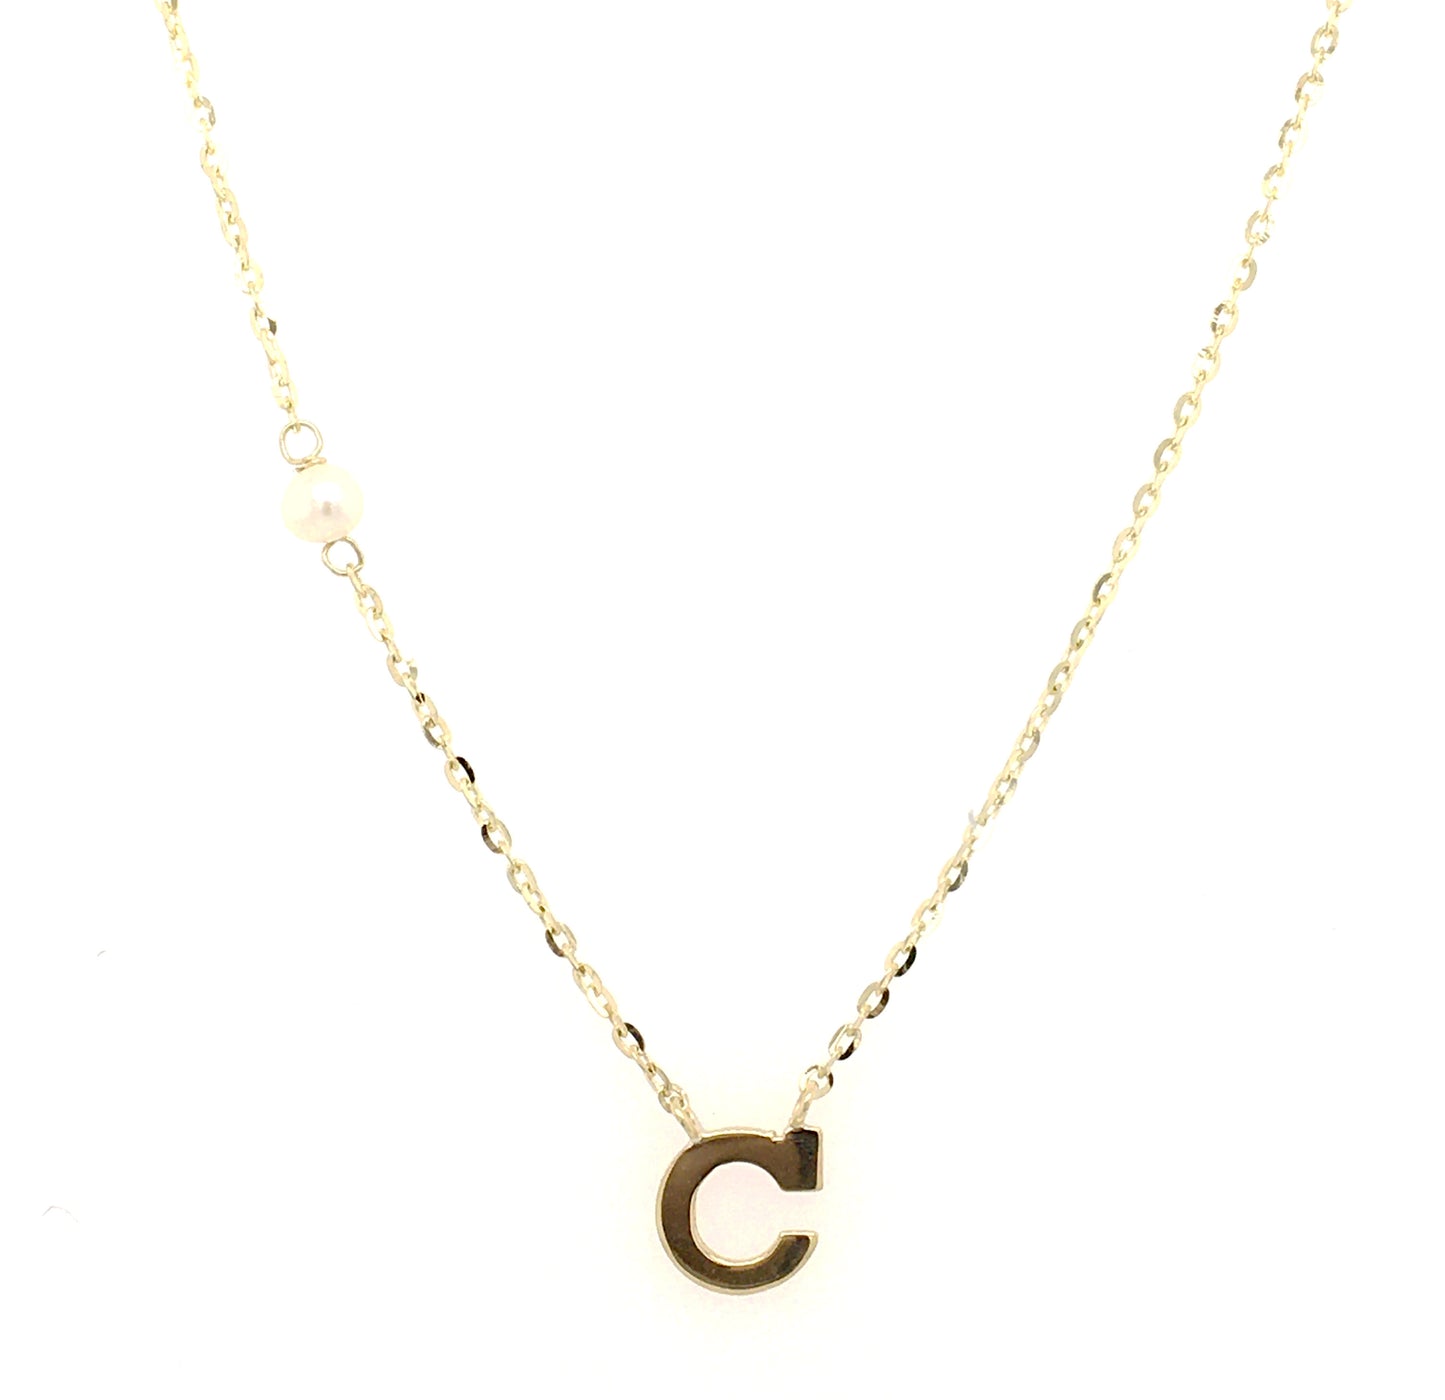 Single Initial (Letter) Block with accent Pearl/Gemstone Necklace 14K Yellow Gold